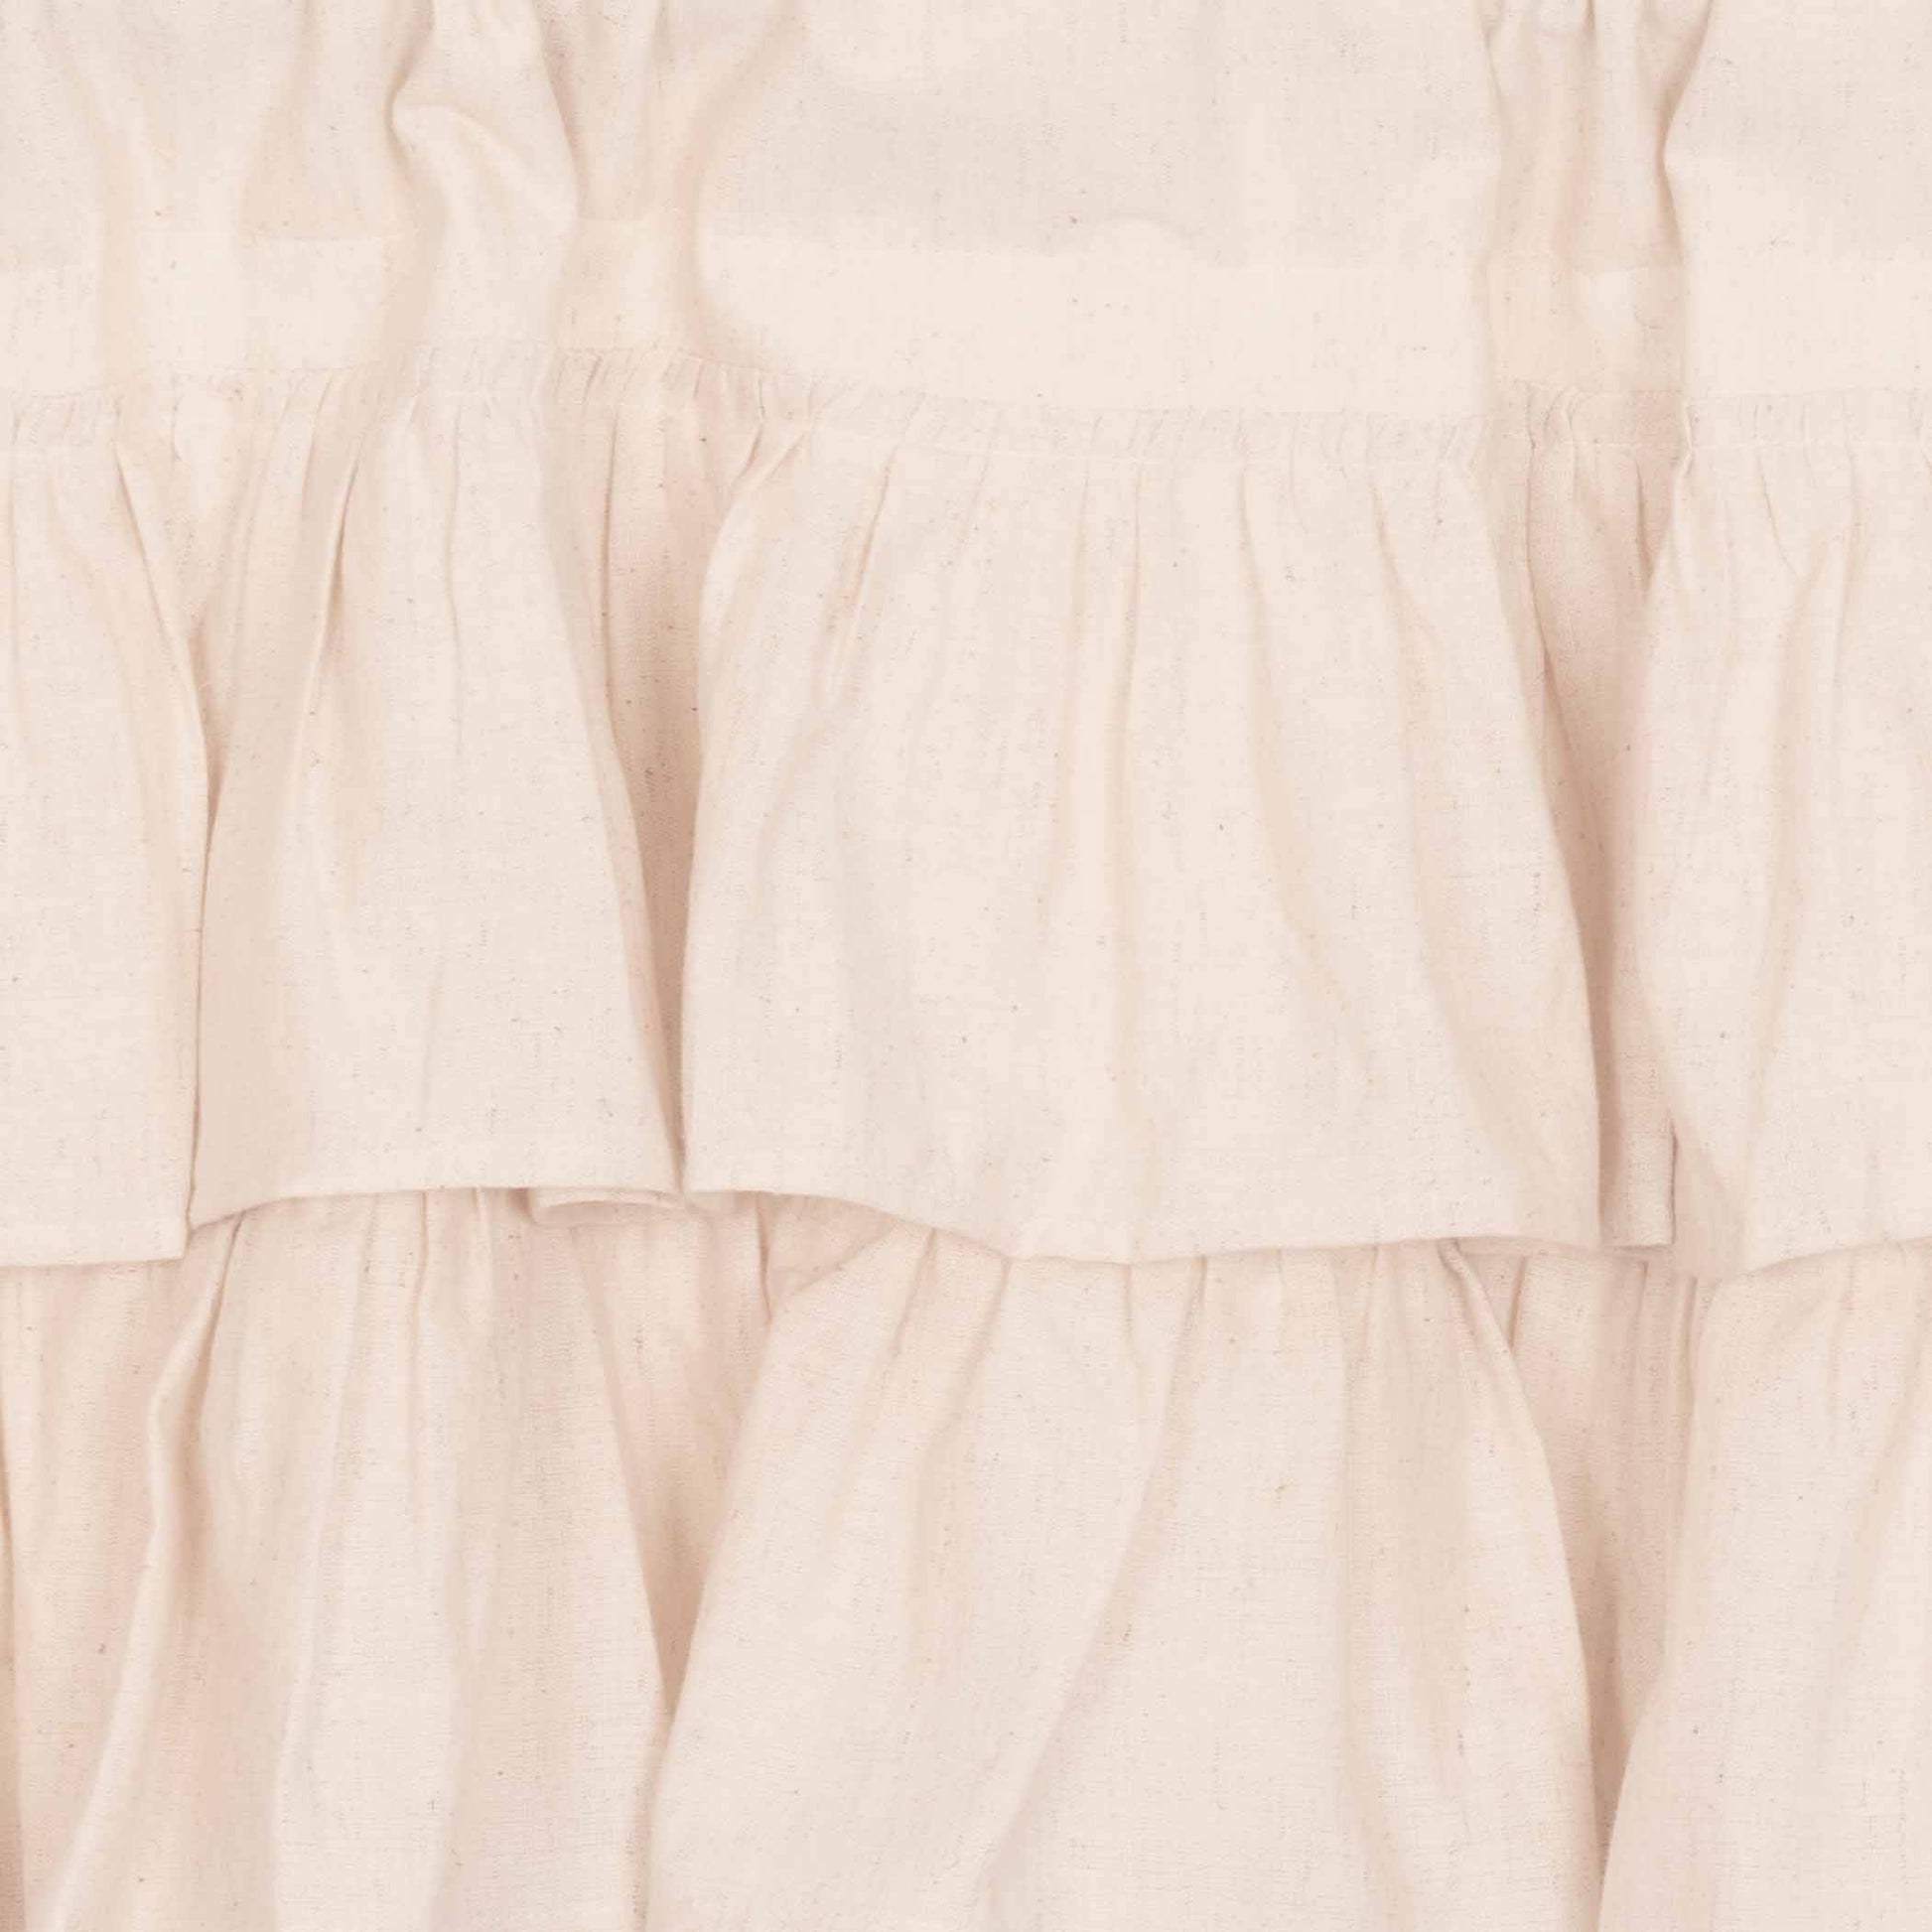 51968-Simple-Life-Flax-Natural-Ruffled-Tier-Set-of-2-L24xW36-image-8